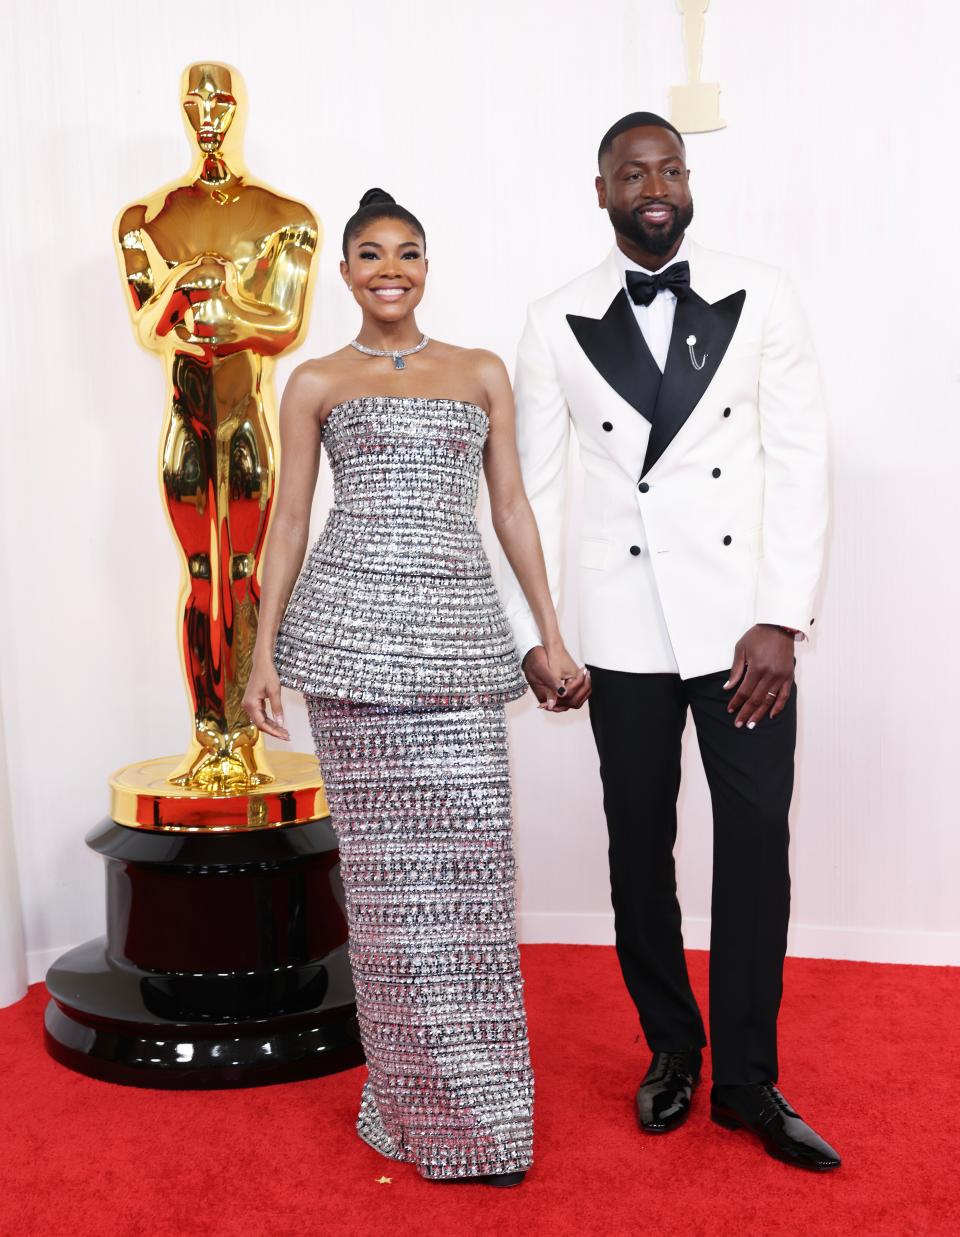 Image may contain: Dwyane Wade, Gabrielle Union, Fashion, Accessories, Jewelry, Necklace, Adult, Person, and Wedding